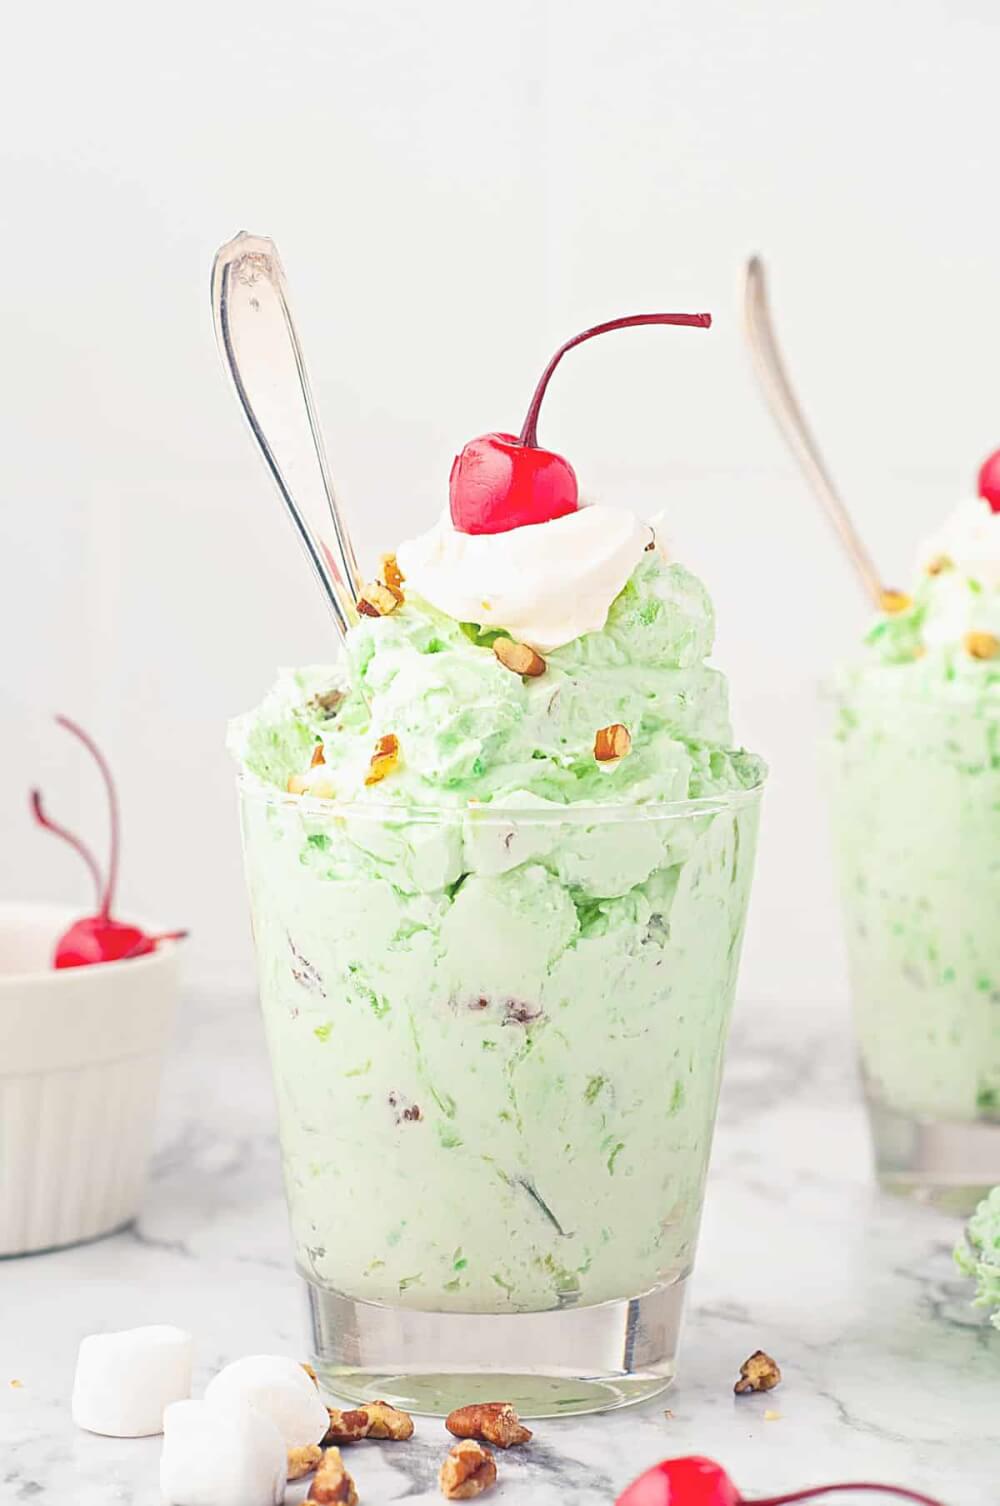 Pineapple Dessert Recipe Roundup by top Hawaii blog Hawaii Travel with Kids: Watergate Salad in a glass with whipped topping and a cherry on top